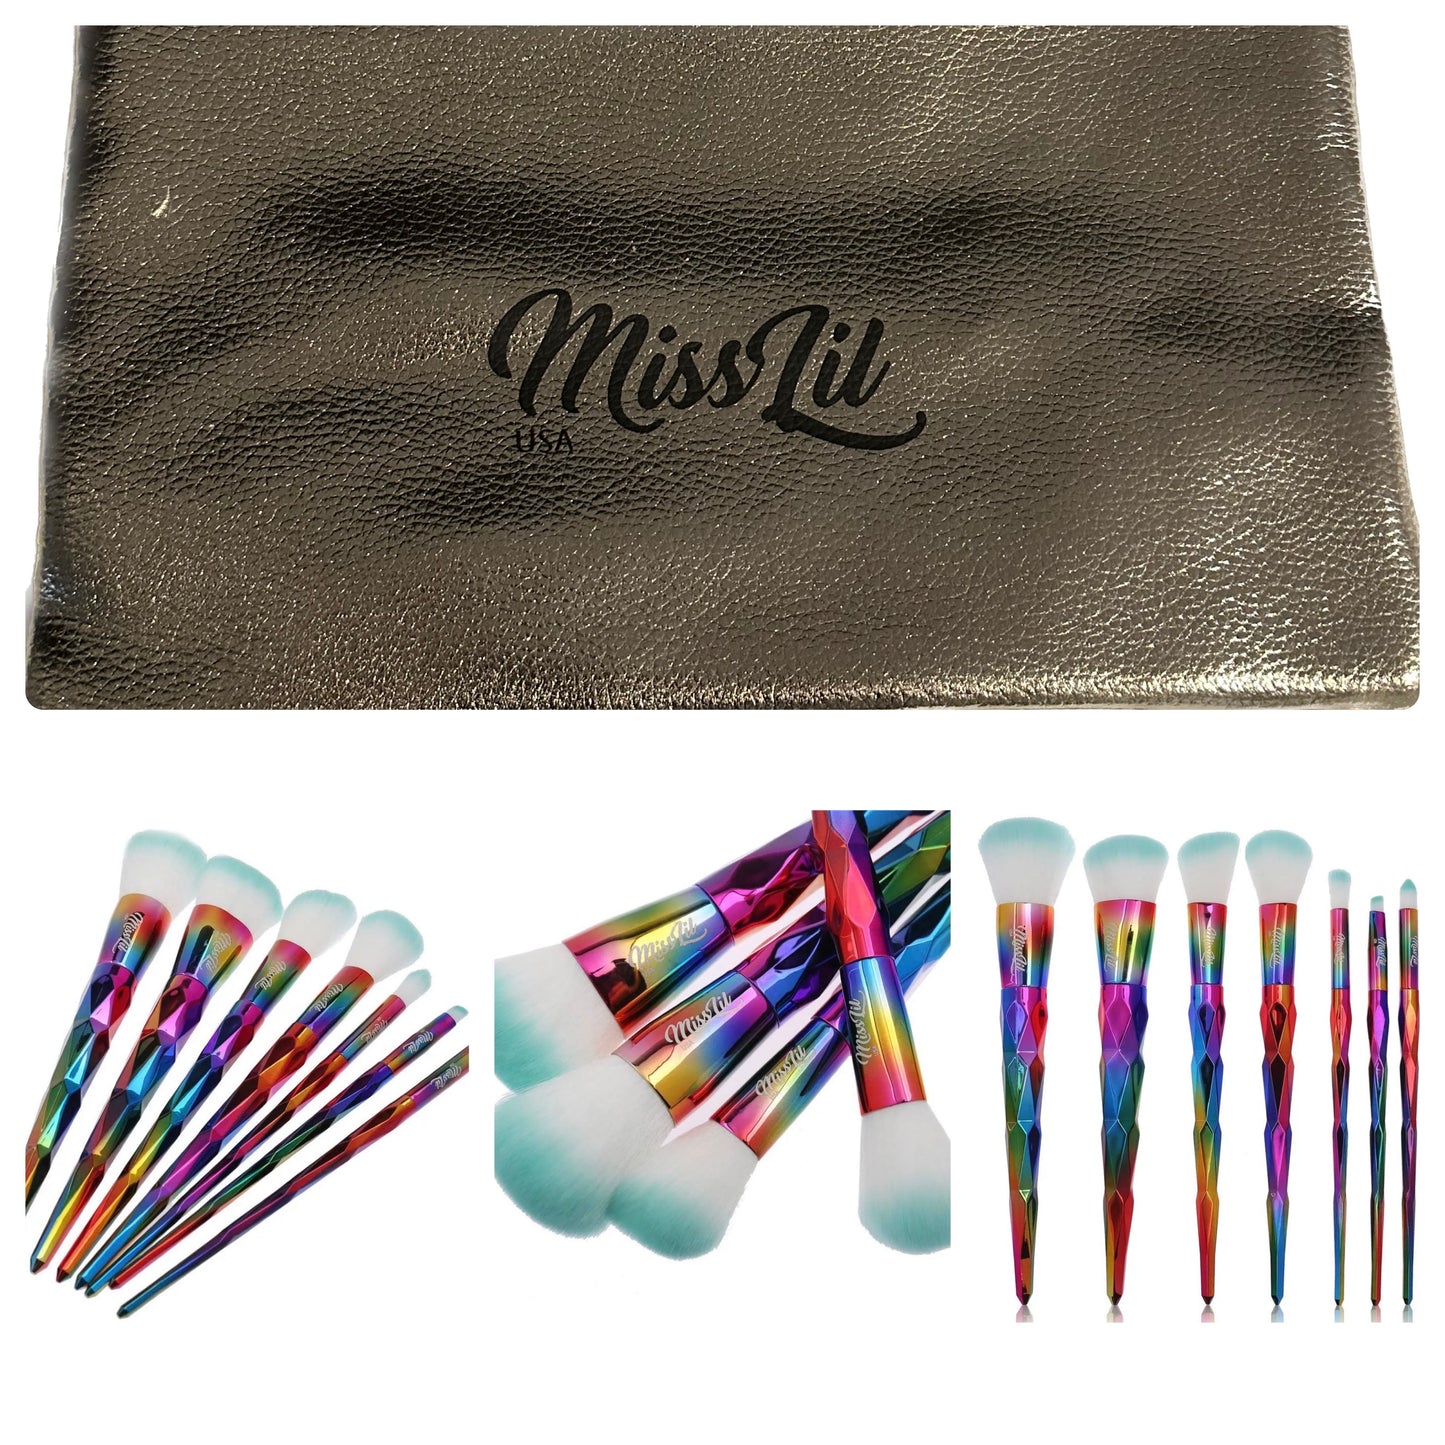 Miss Lil USA Makeup Brushes